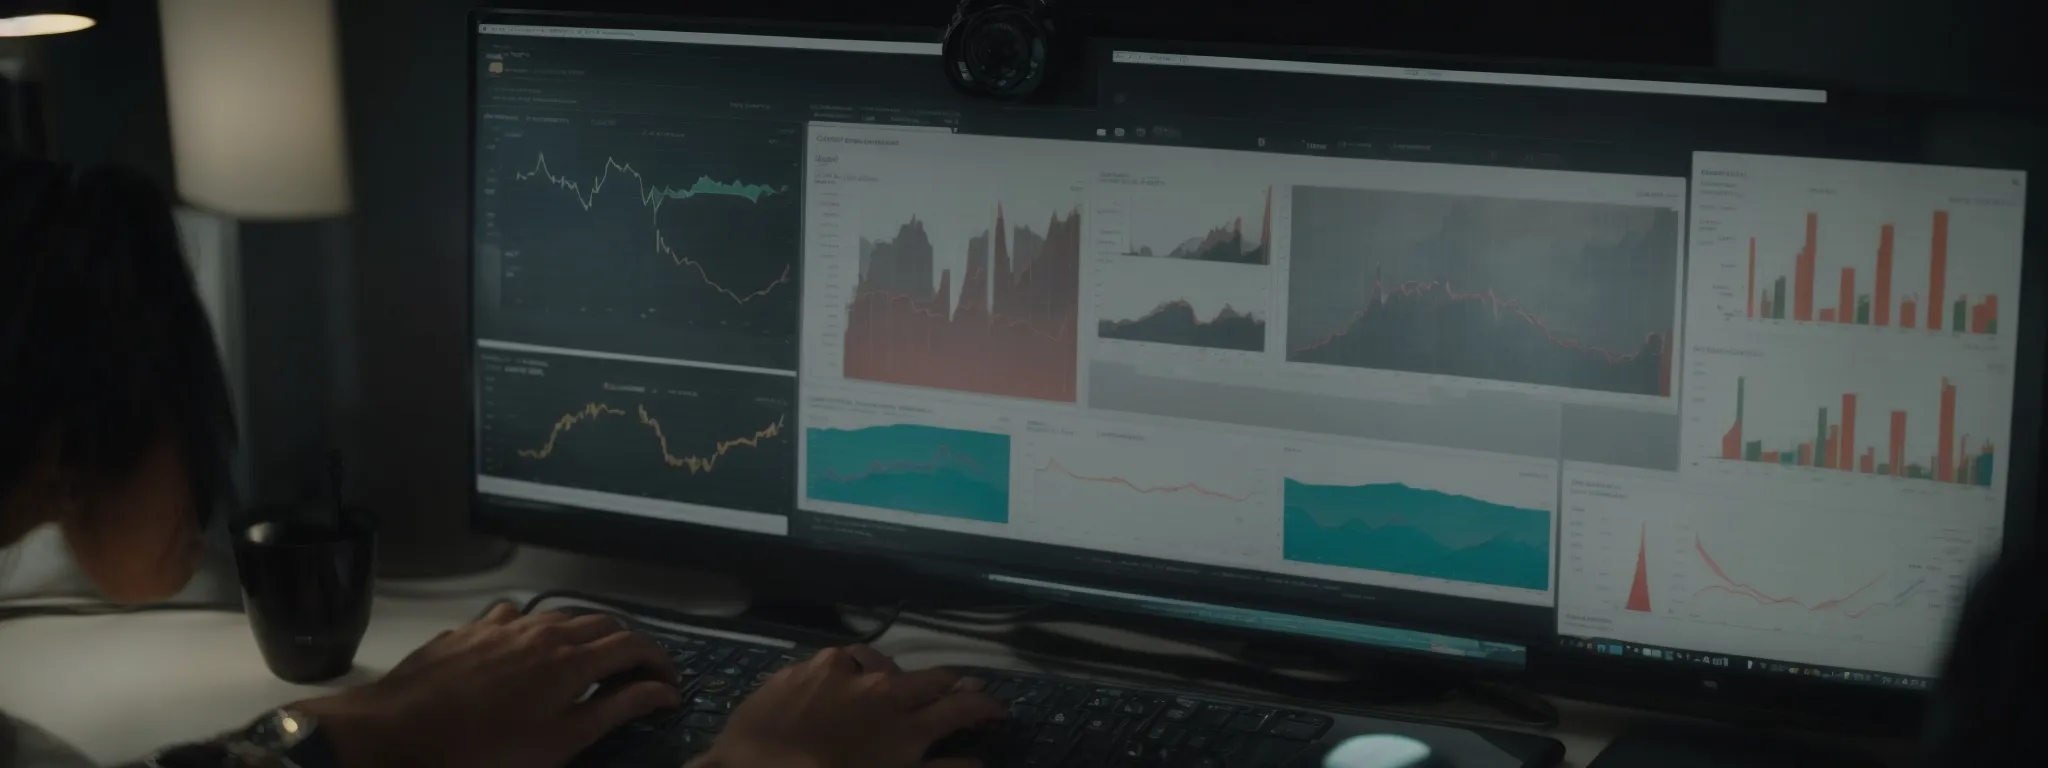 a person analyzes charts and graphs on a computer screen displaying seo performance metrics.